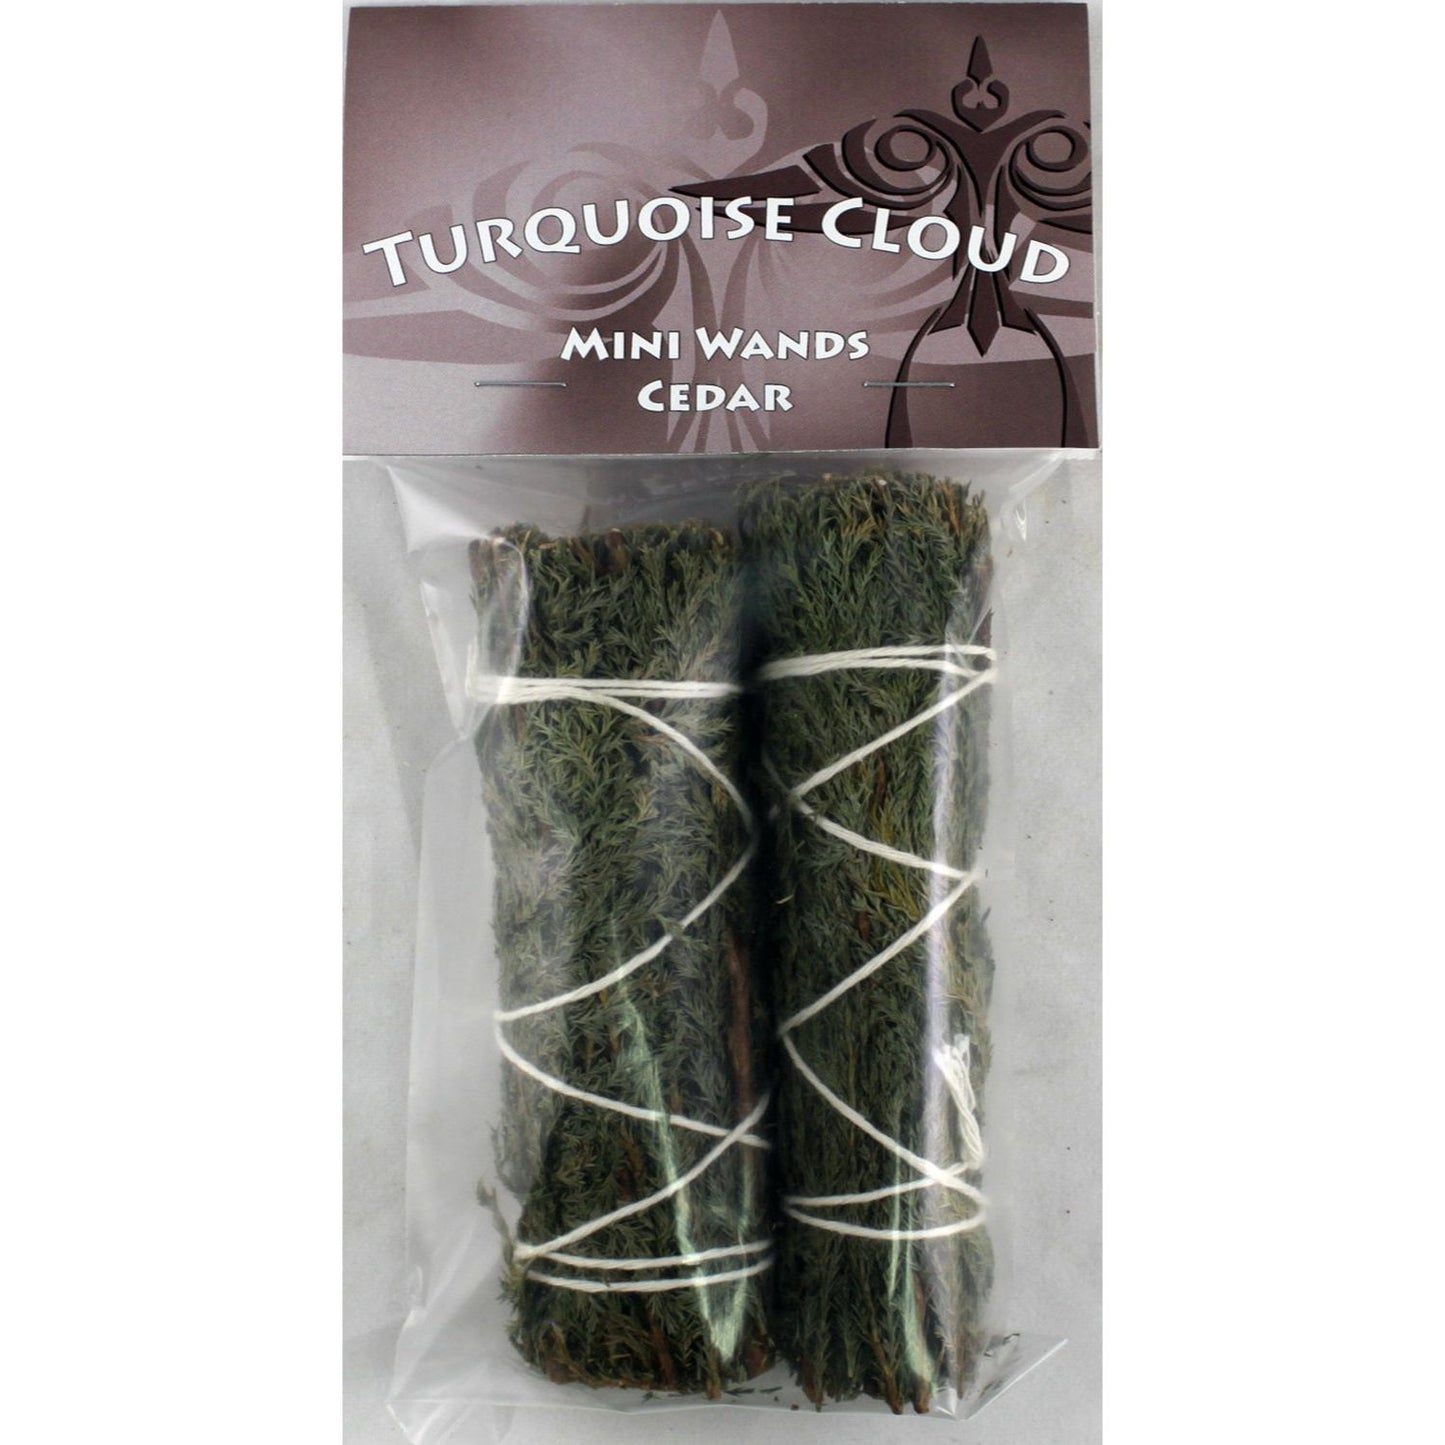 Turquoise Cloud Native American Products - Sage Wands, Cedar